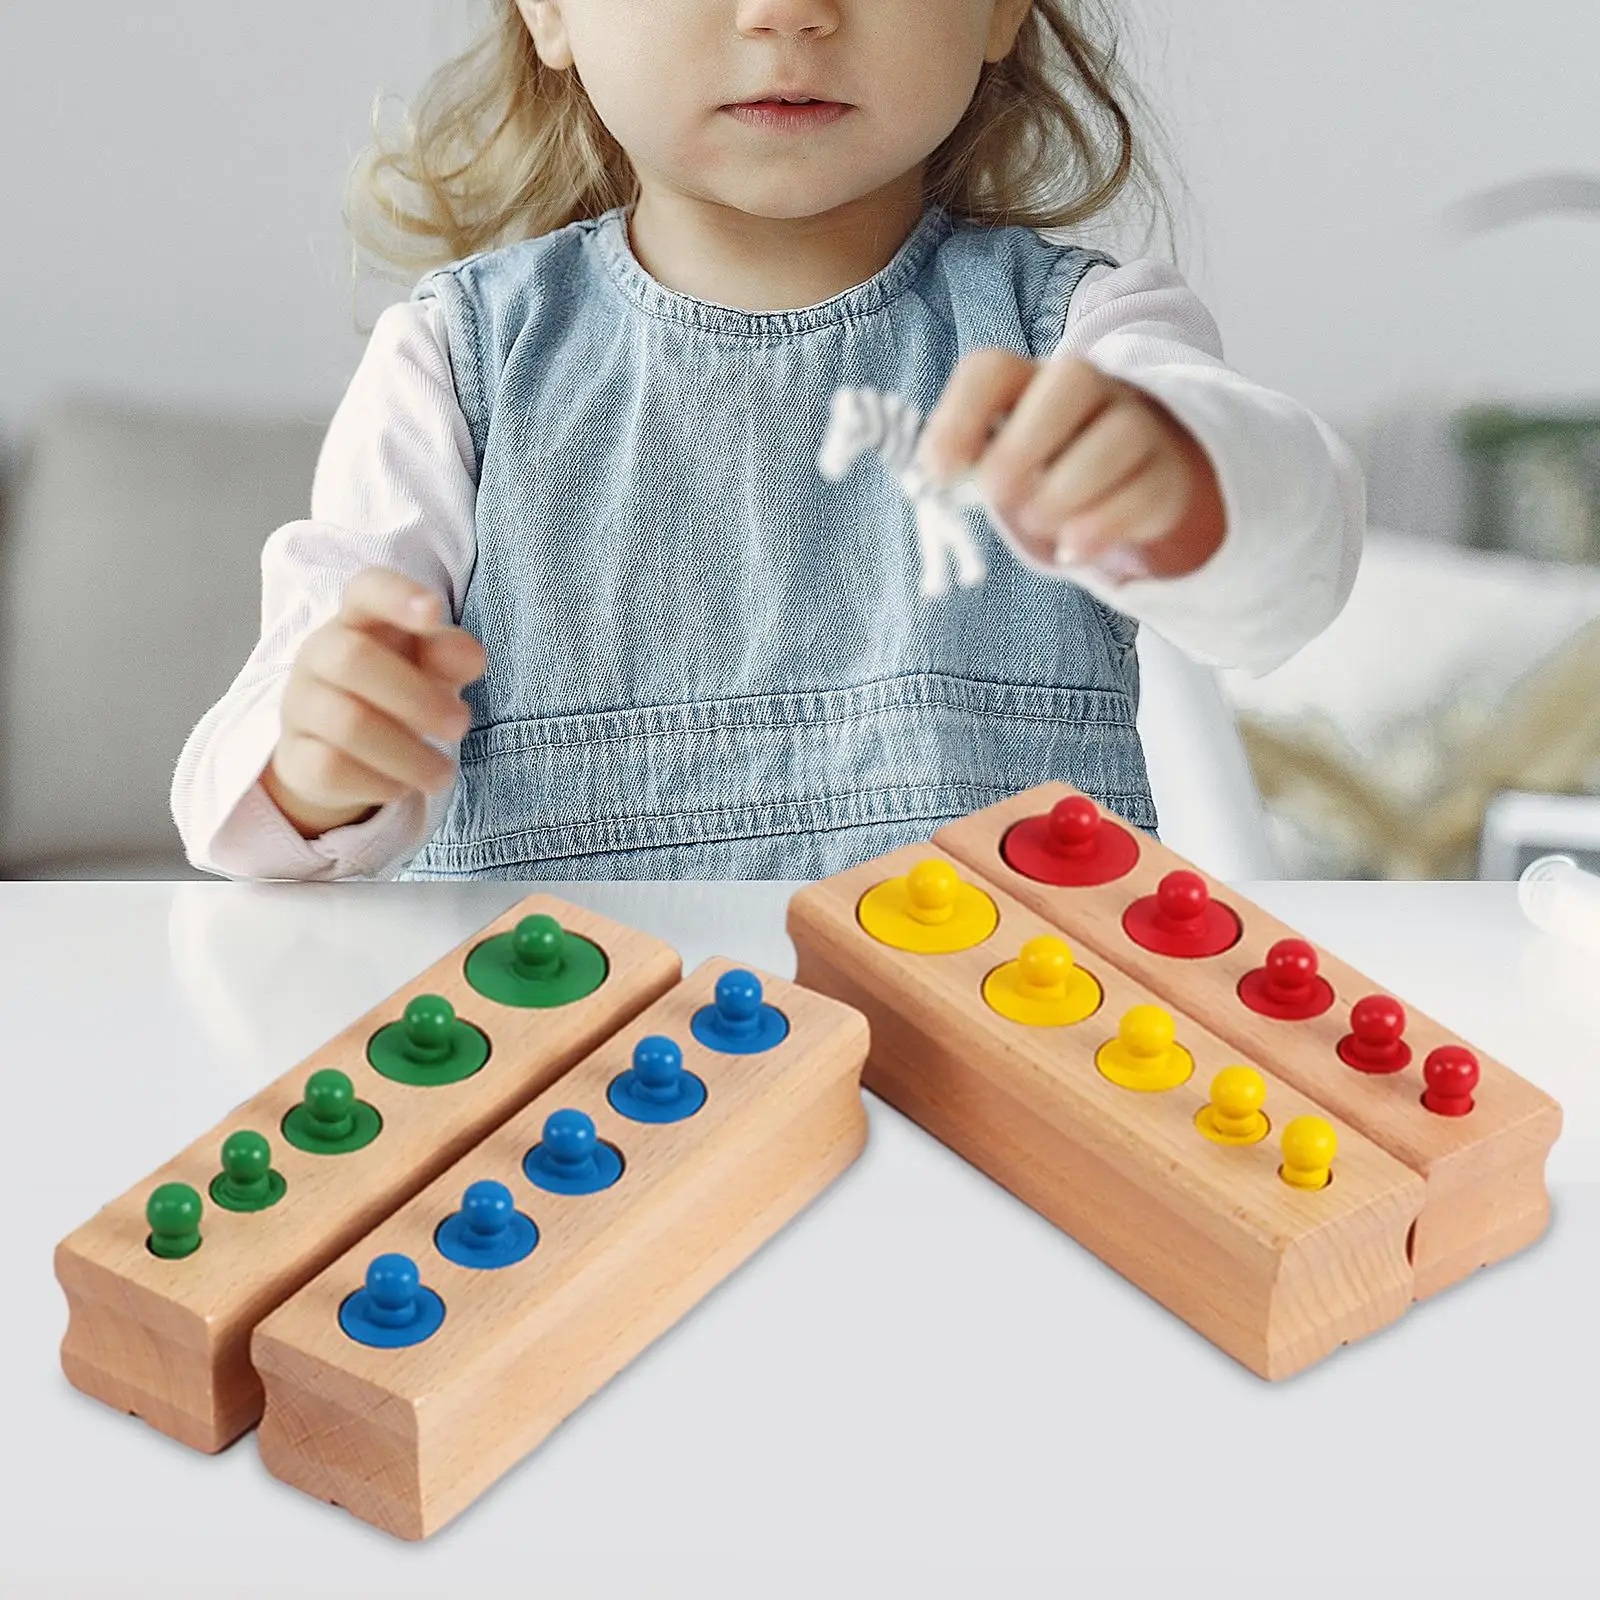 4Pcs Montessori Toy Board Game Early Development Knobbed Cylinders Blocks Socket Wooden Cylinders Ladder Blocks for School Baby